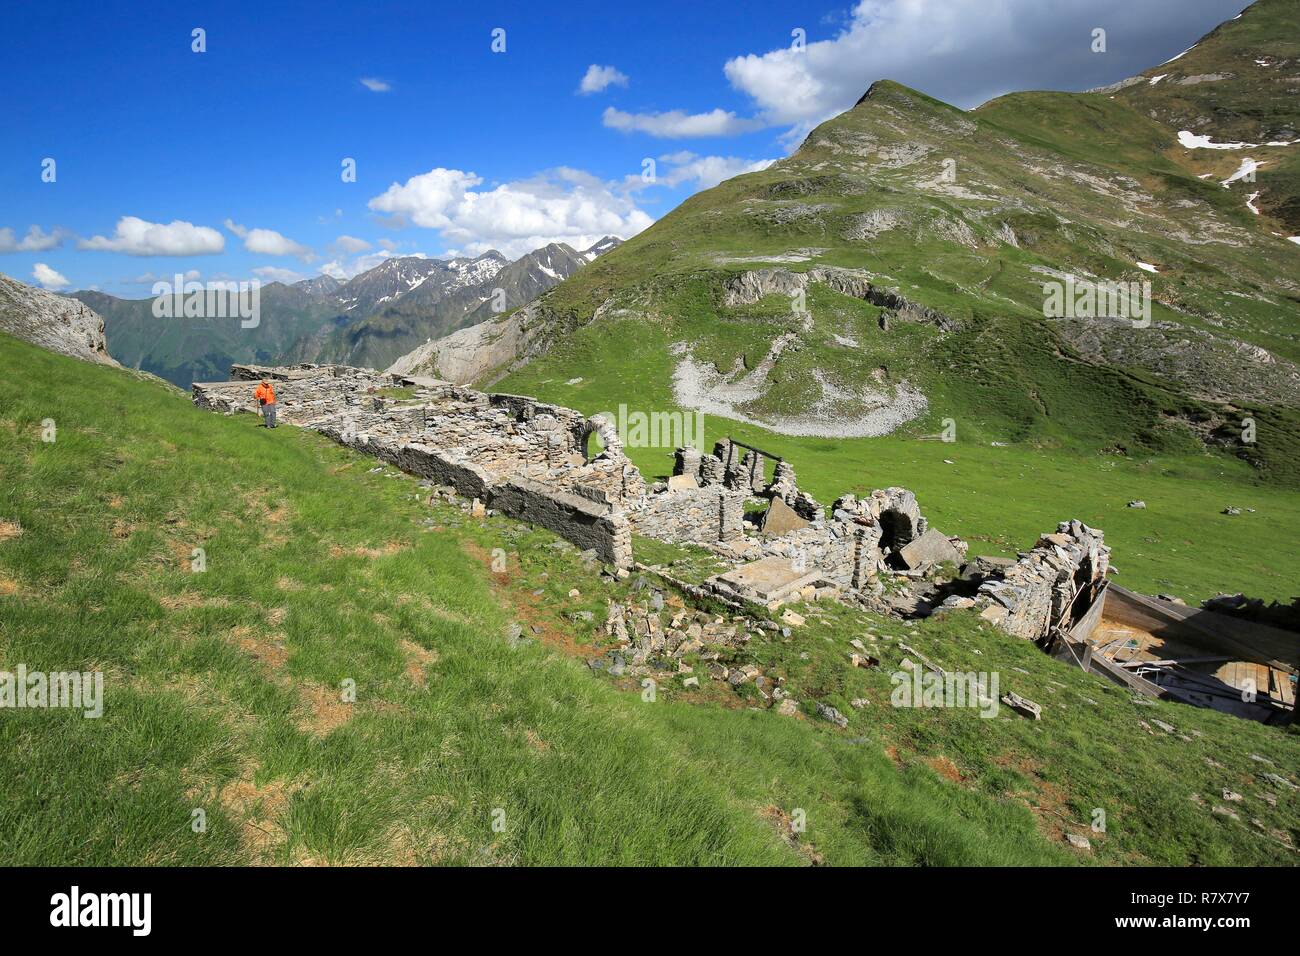 France, Ariege, Ruined building at the port of Salau (2,087 m) is a border crossing of the Pyrenees between France and Spain Stock Photo